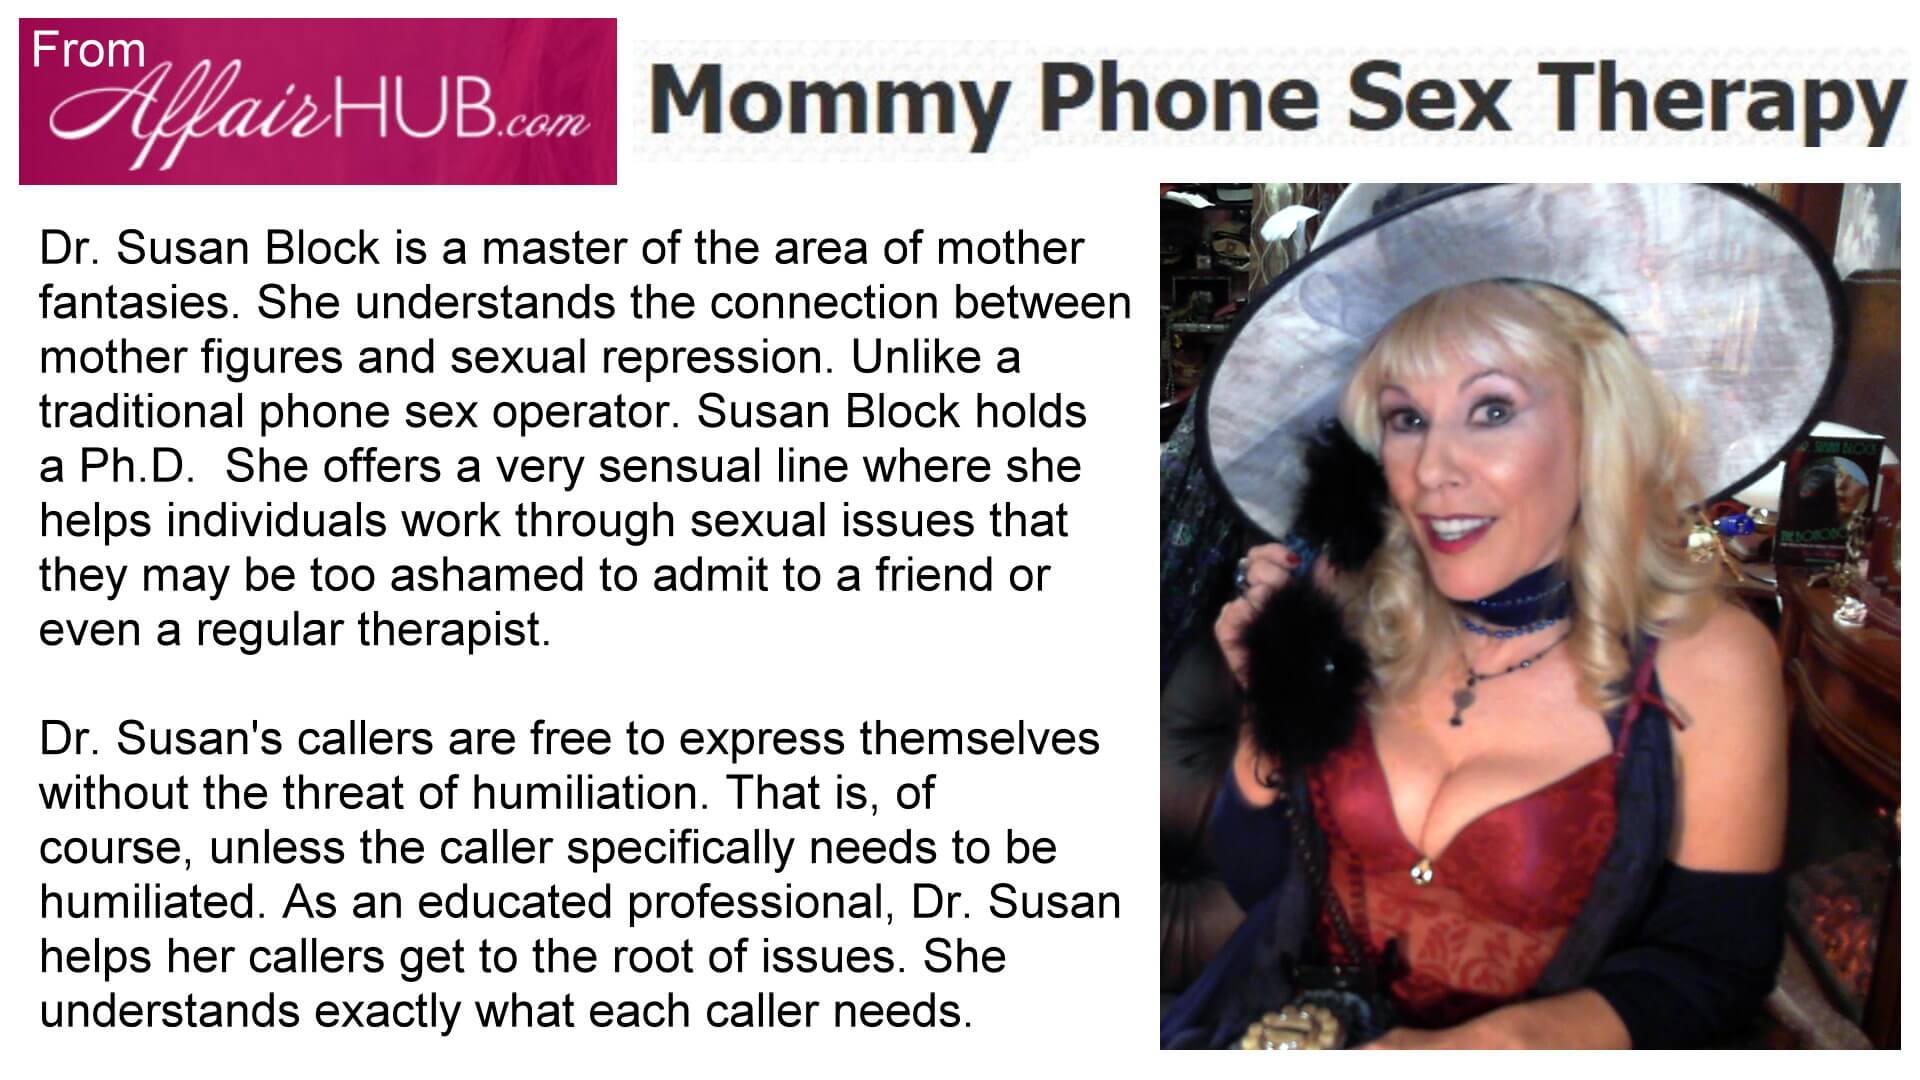 Real Dirty Talking Incest - Mom Phone Sex Therapy - Dr Susan Block Institute